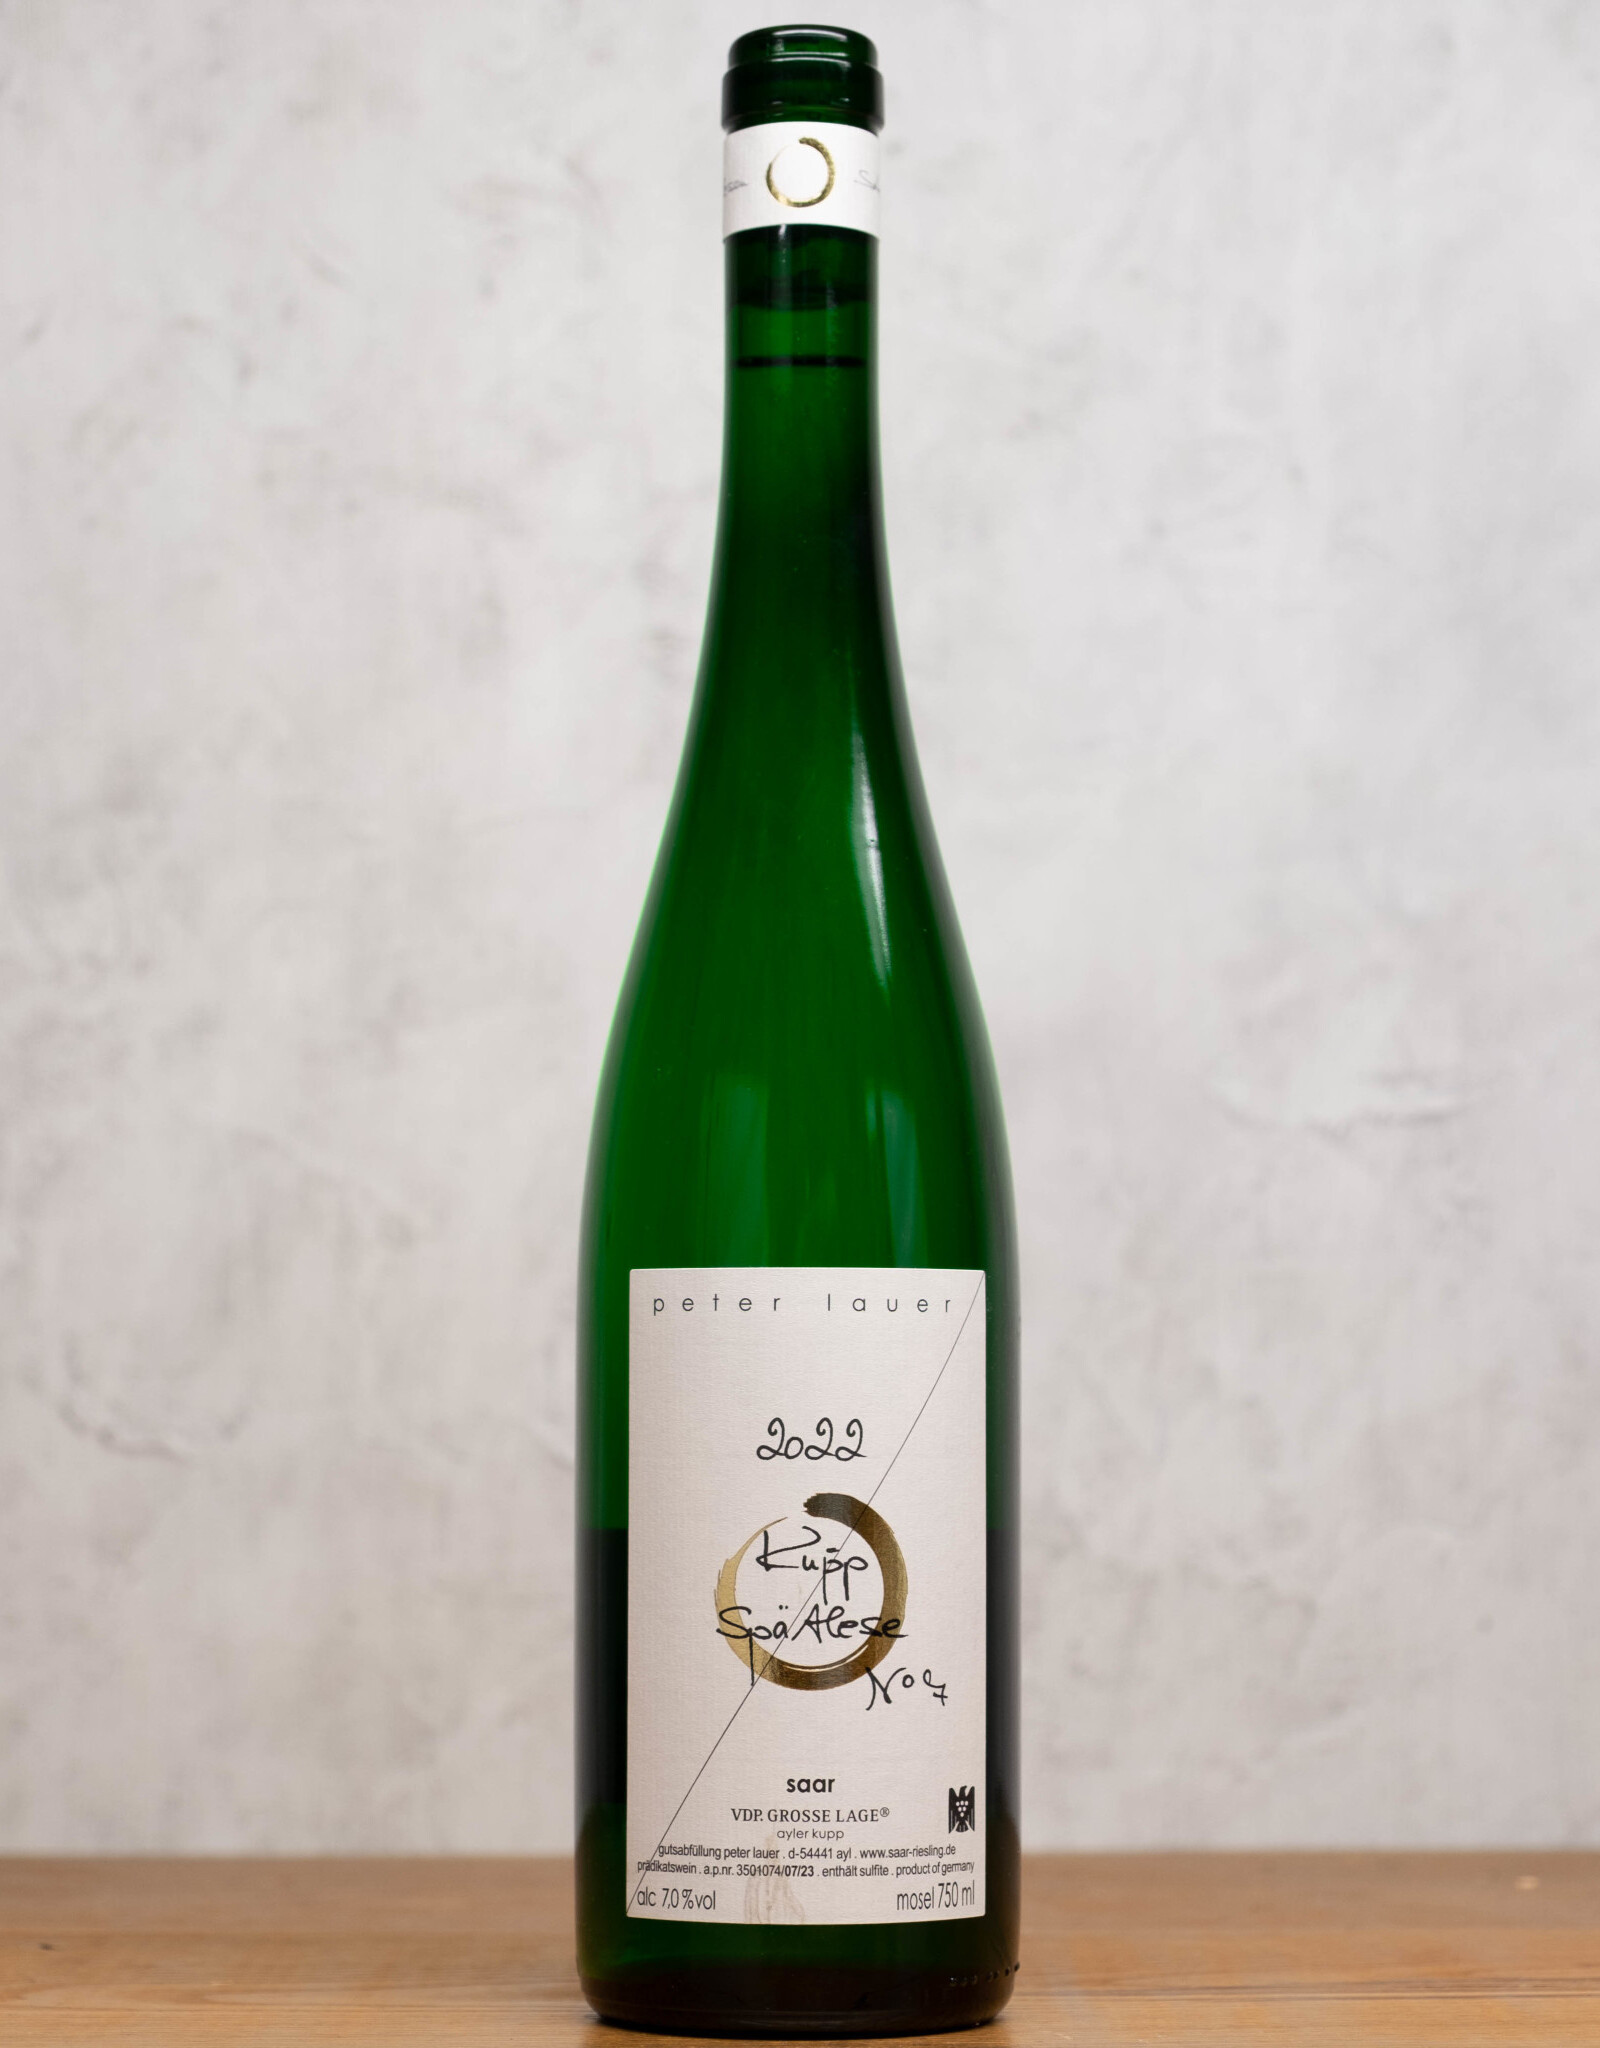 Peter Lauer No 7 Kupp Spatlese Riesling